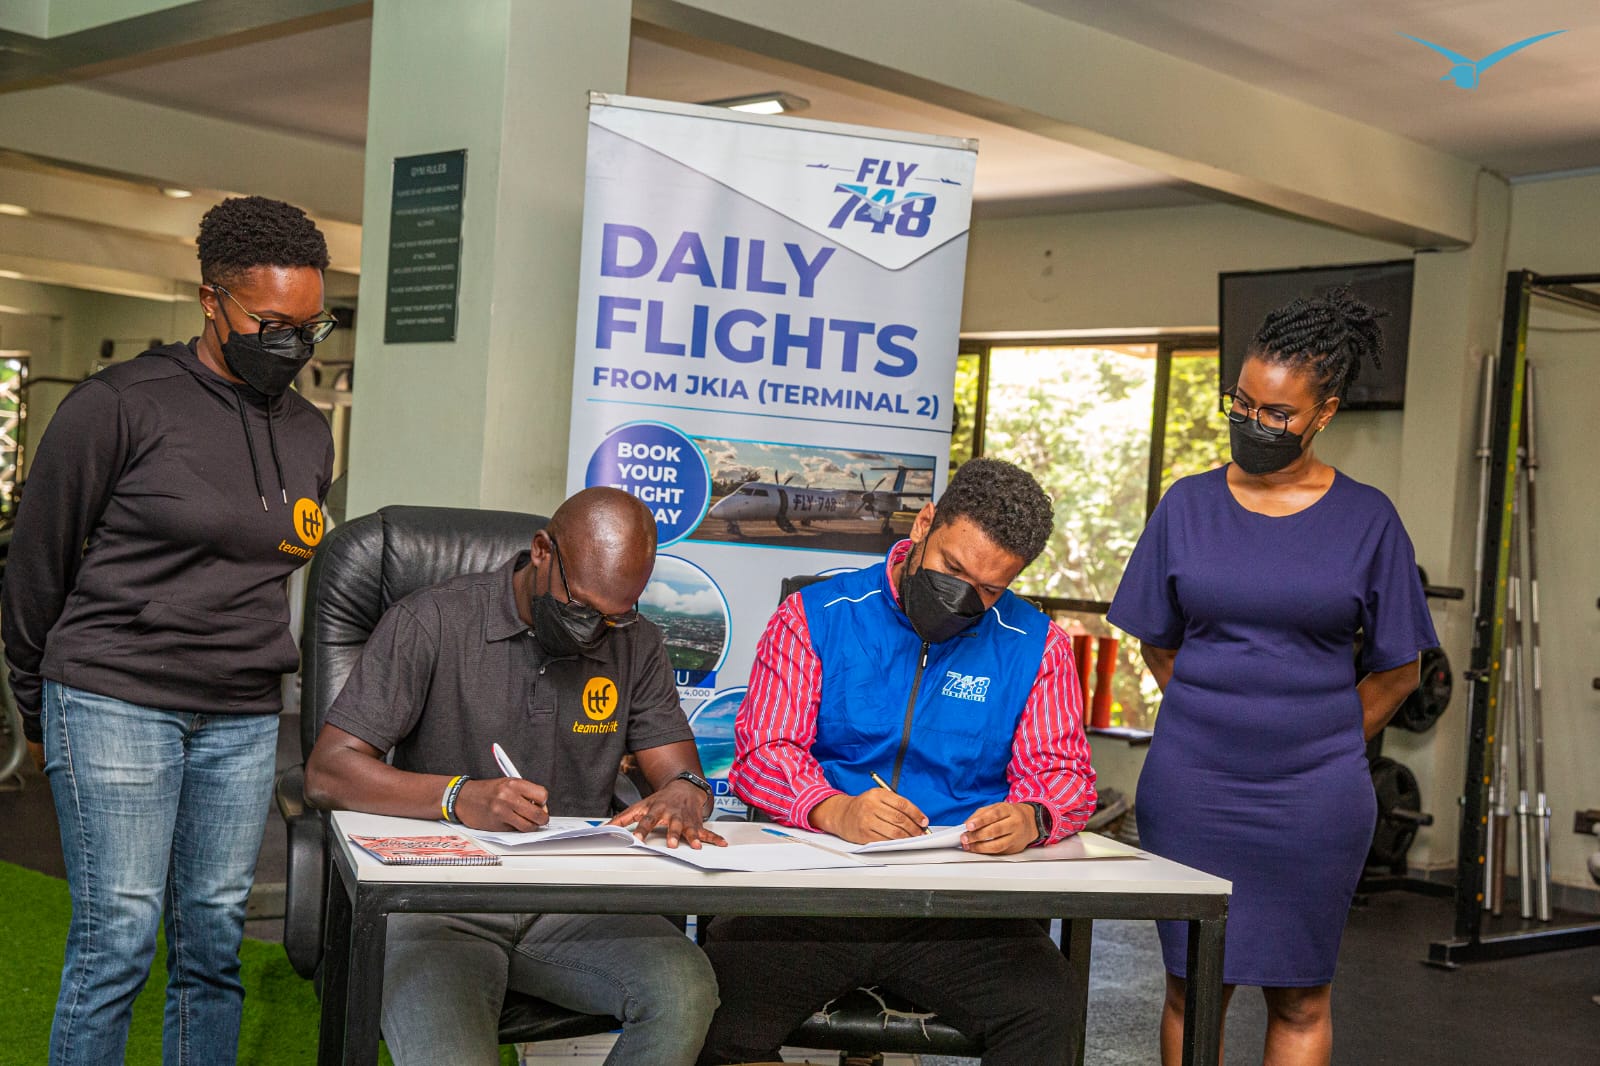 Fly 748 Signs Deal With Team Tri Fit To Foster Triathlon in Kenya